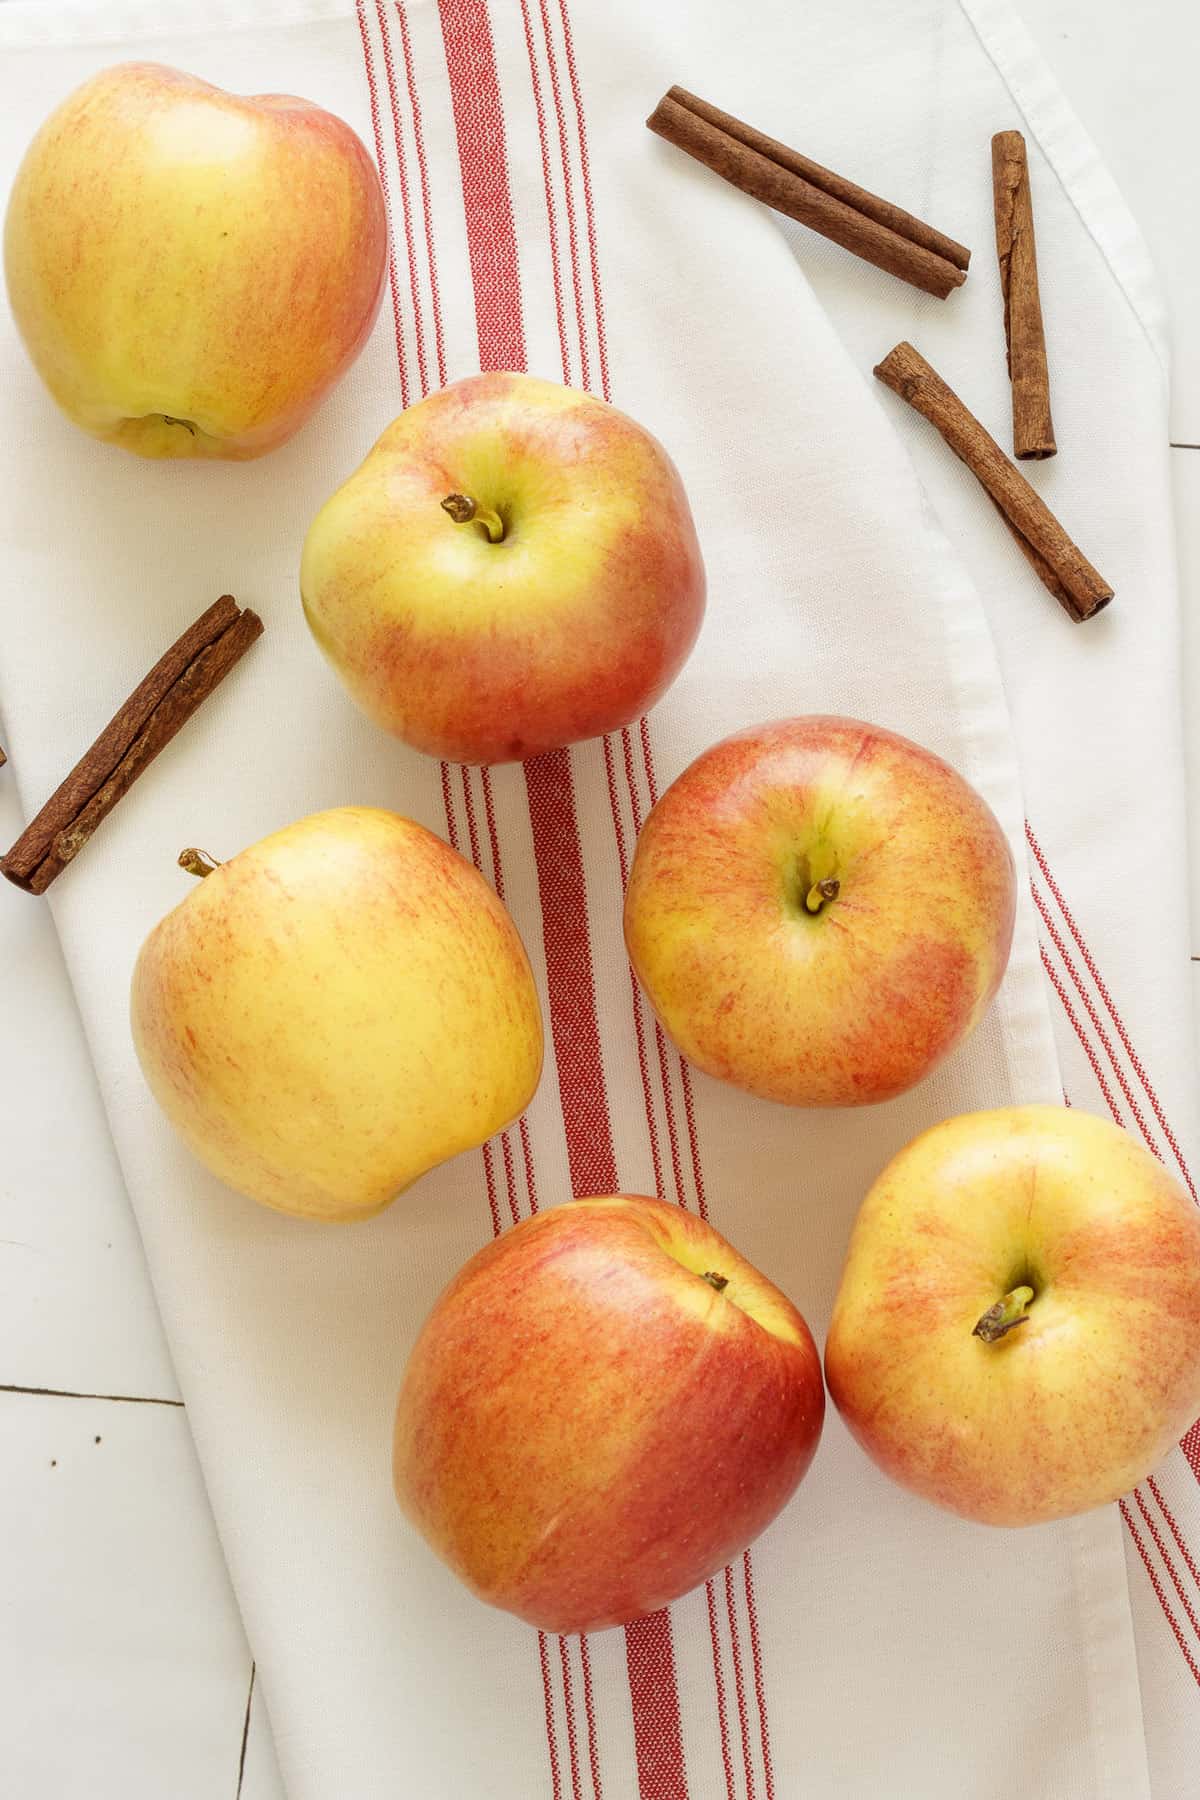 Apples and cinnamon sticks on a white and red striped napkin